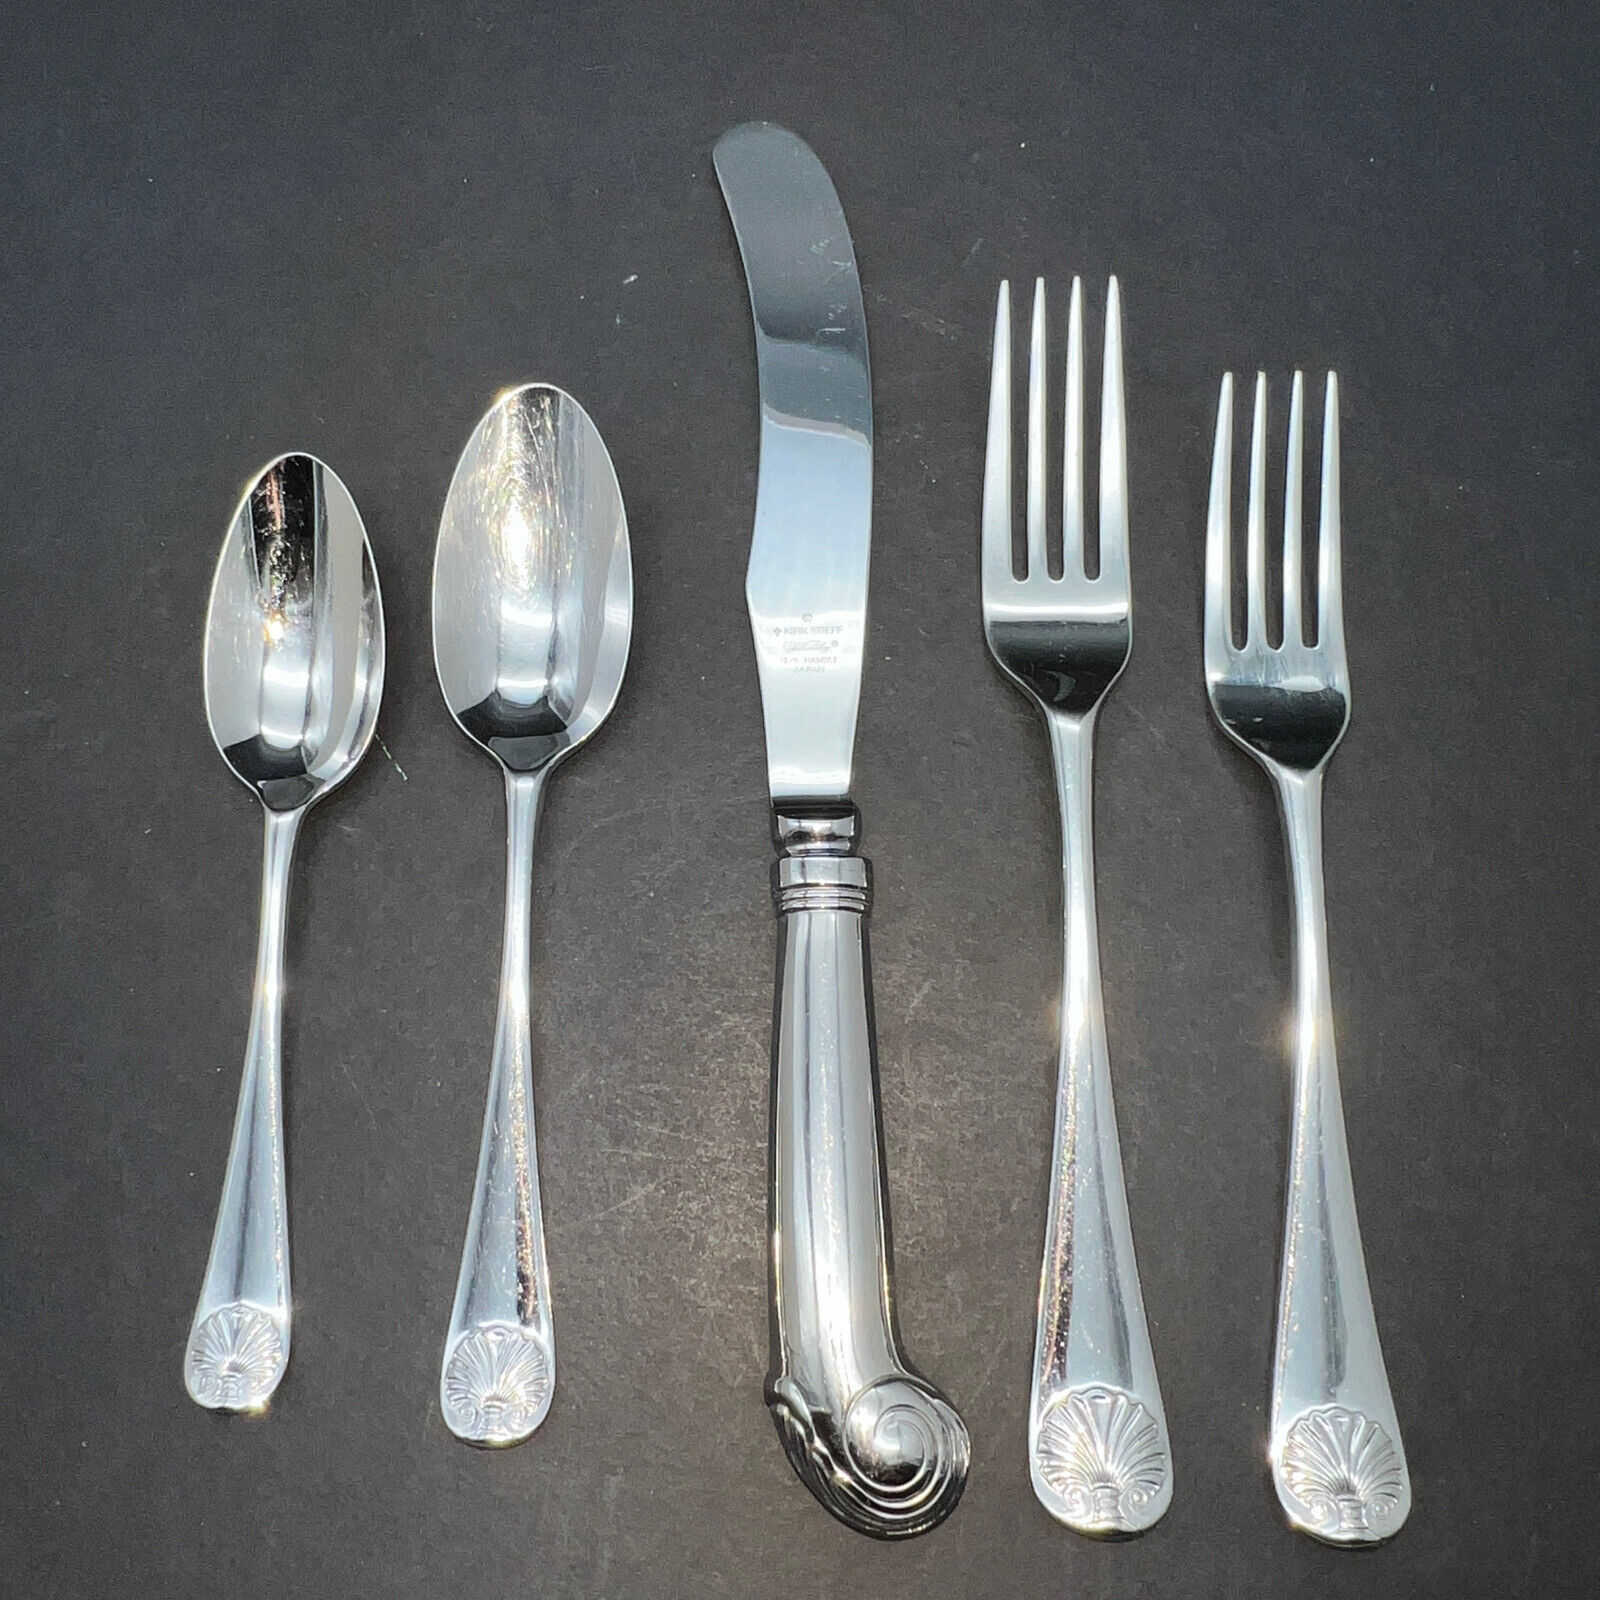 5 PC Place Setting(s) WILLIAMSBURG ROYAL SHELL Kirk Stieff 18/8 Glossy Stainless